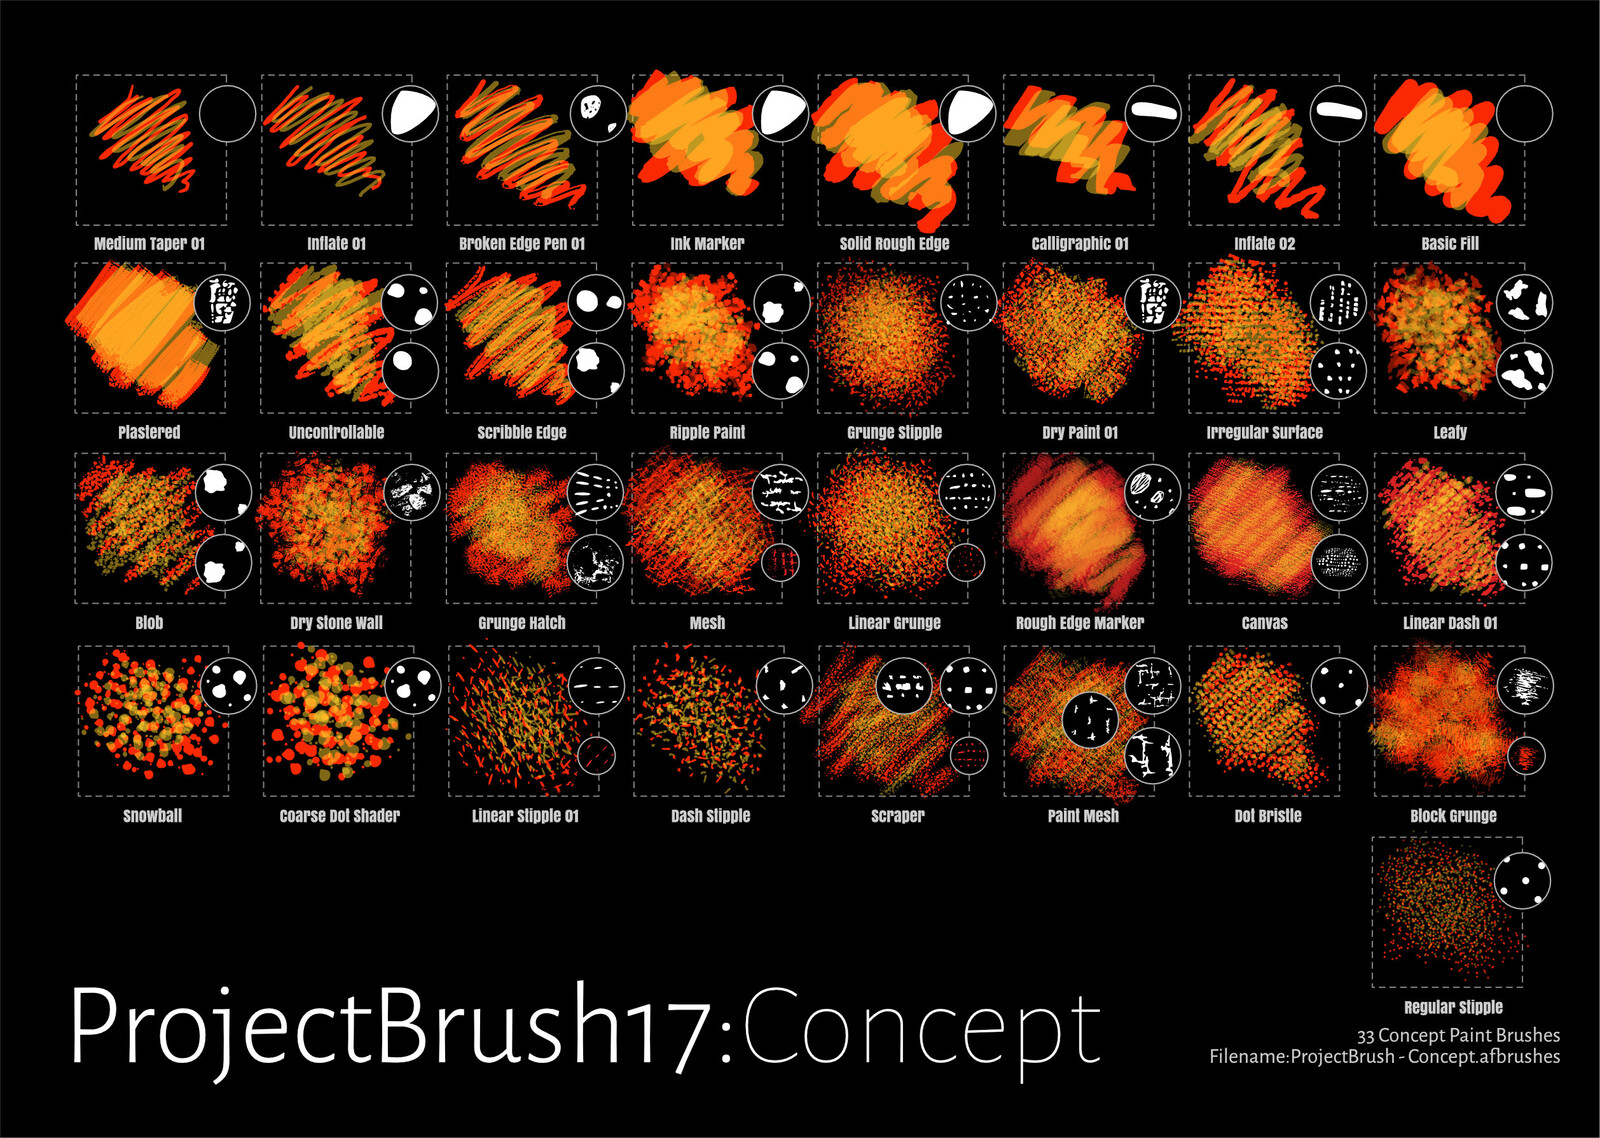 Project Brush: Concept
Version 01